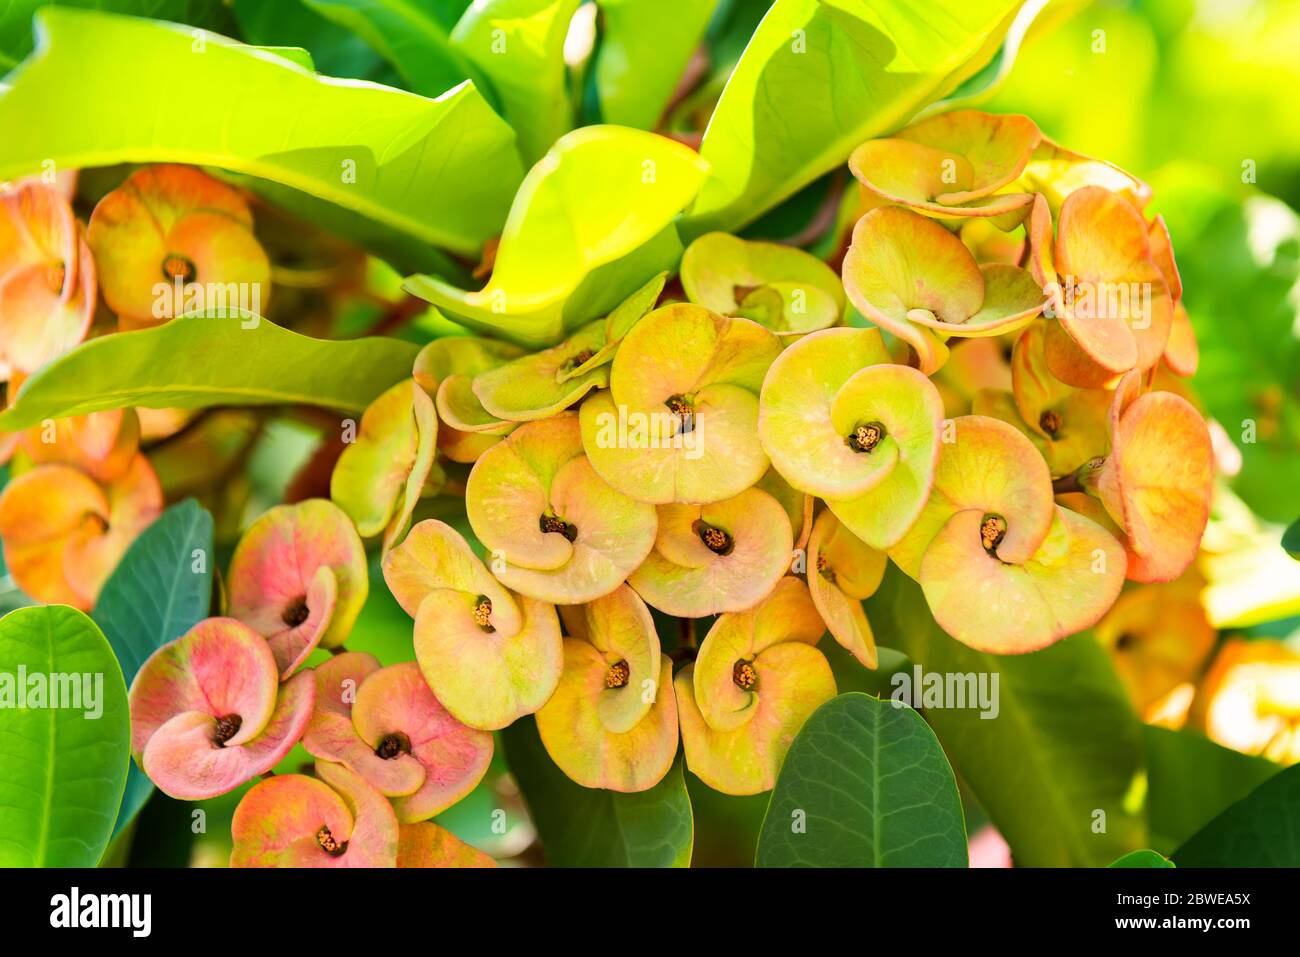 Crown of thorns. Christ Thorn flower blooming with green leaves background in flowerpot at the park. Stock Photo